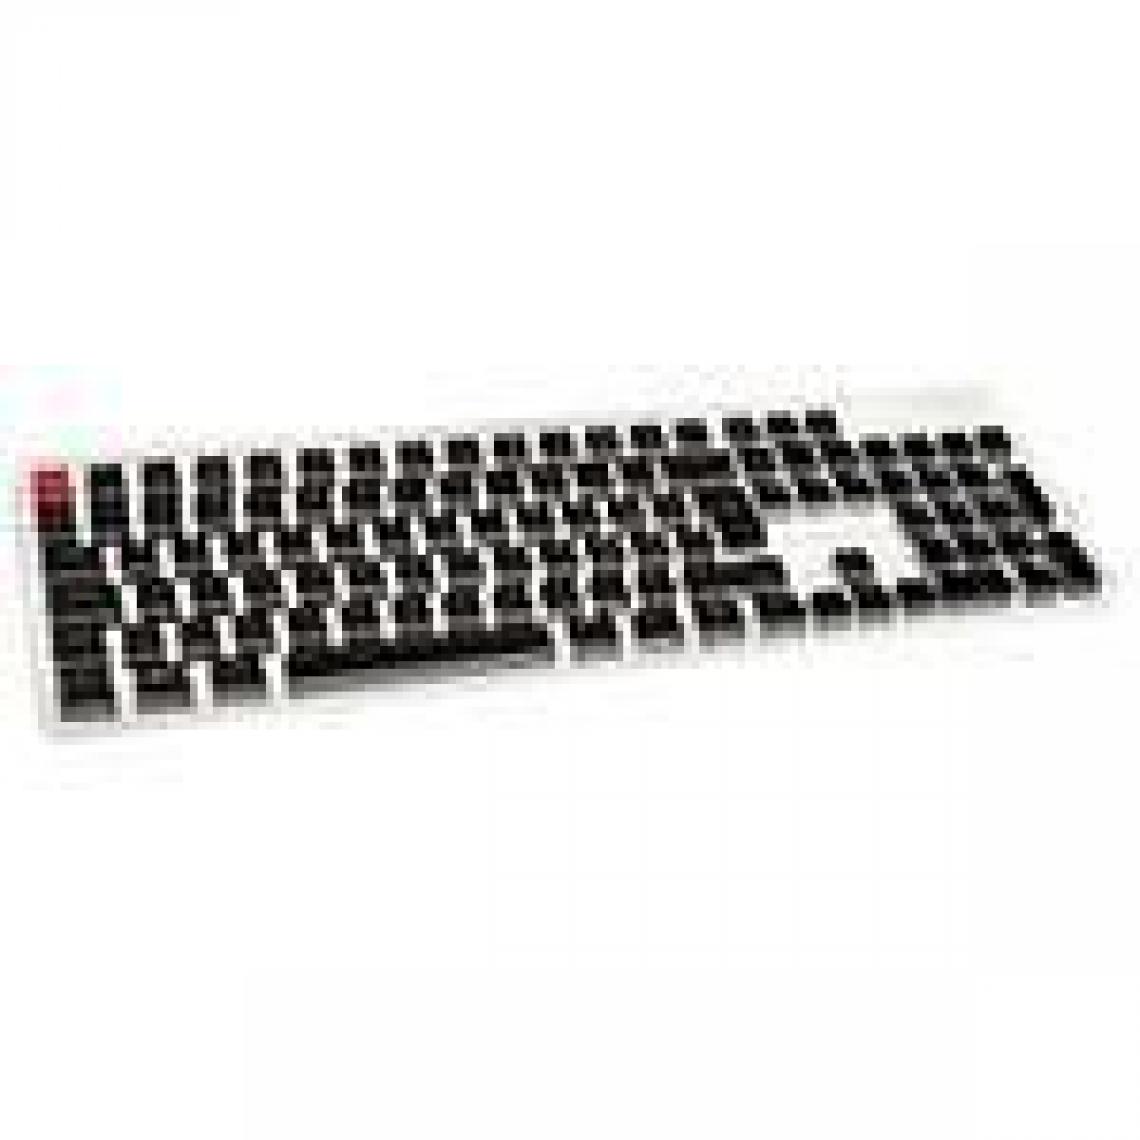 Glorious Pc Gaming Race - Glorious ISO ABS Keycaps (QWERTY, Espagne) - Clavier